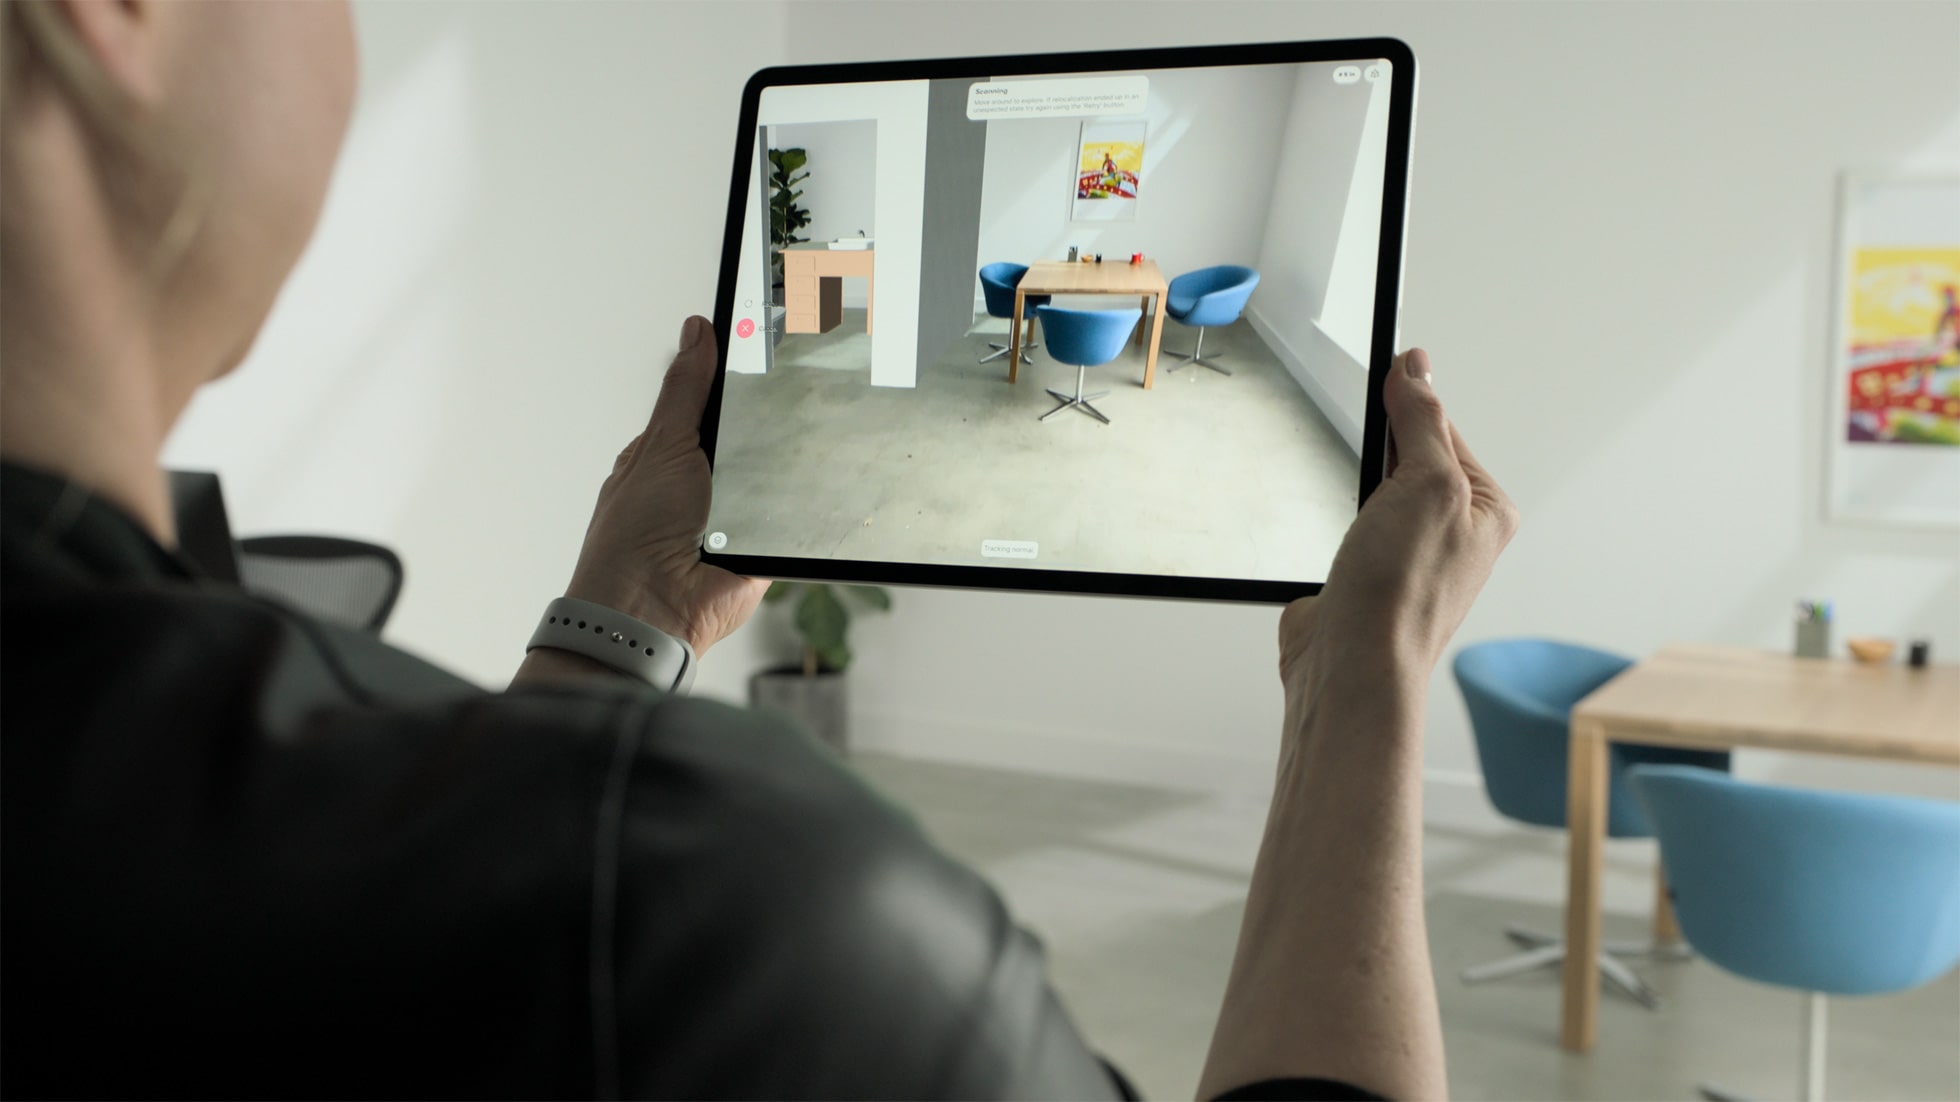 2020 iPad Pro: Better augmented reality than ever before